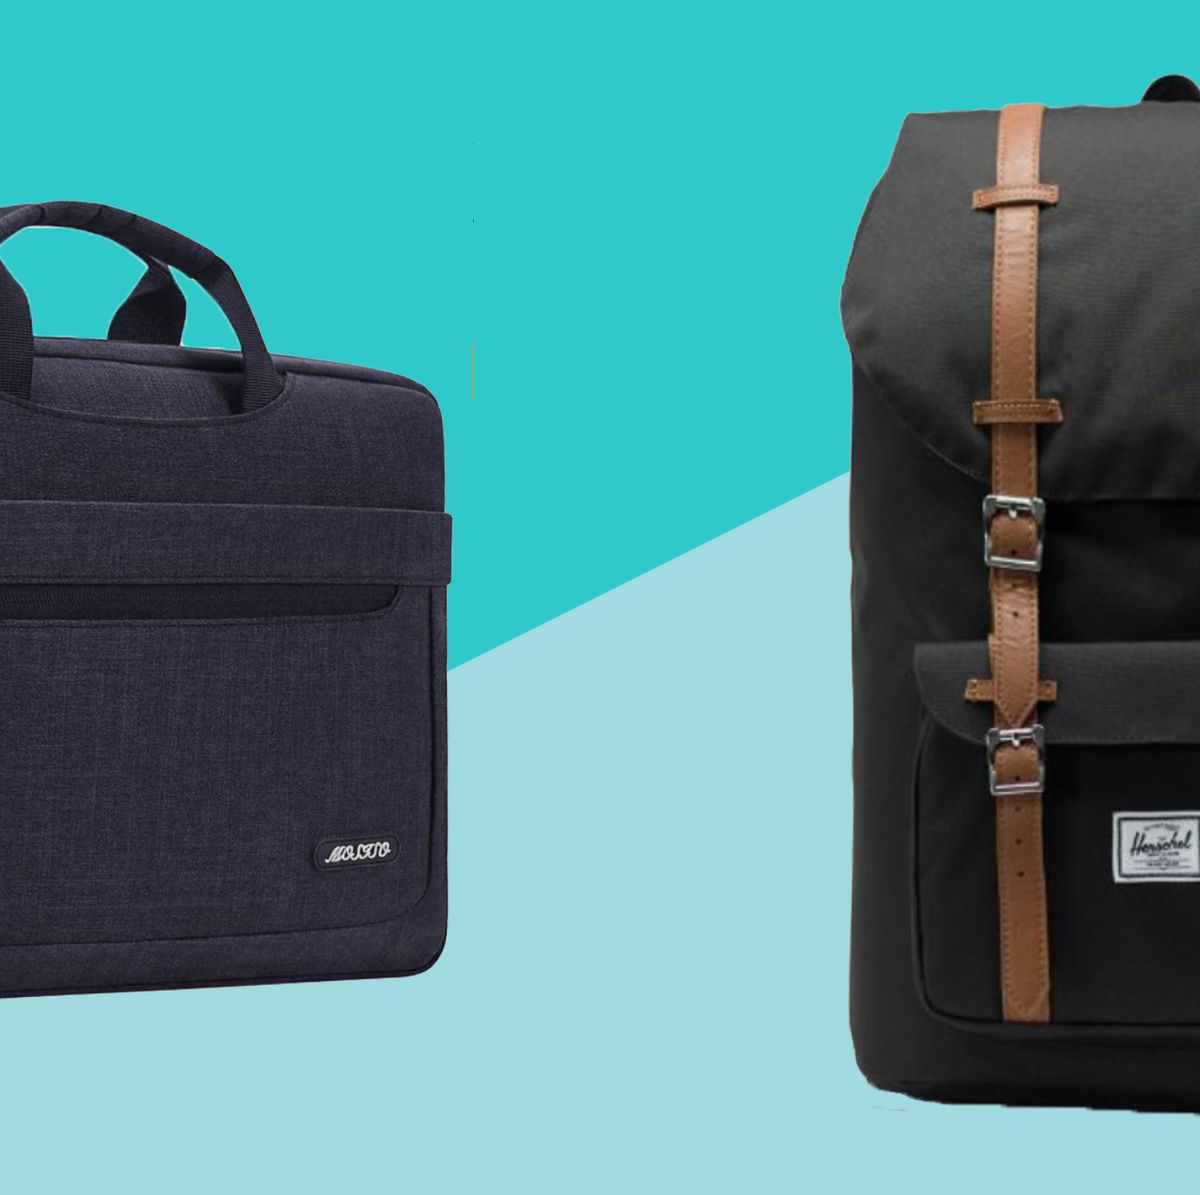 This Handbag Brand Is Perfect for Women Who Carry Their Laptops to and From  Work